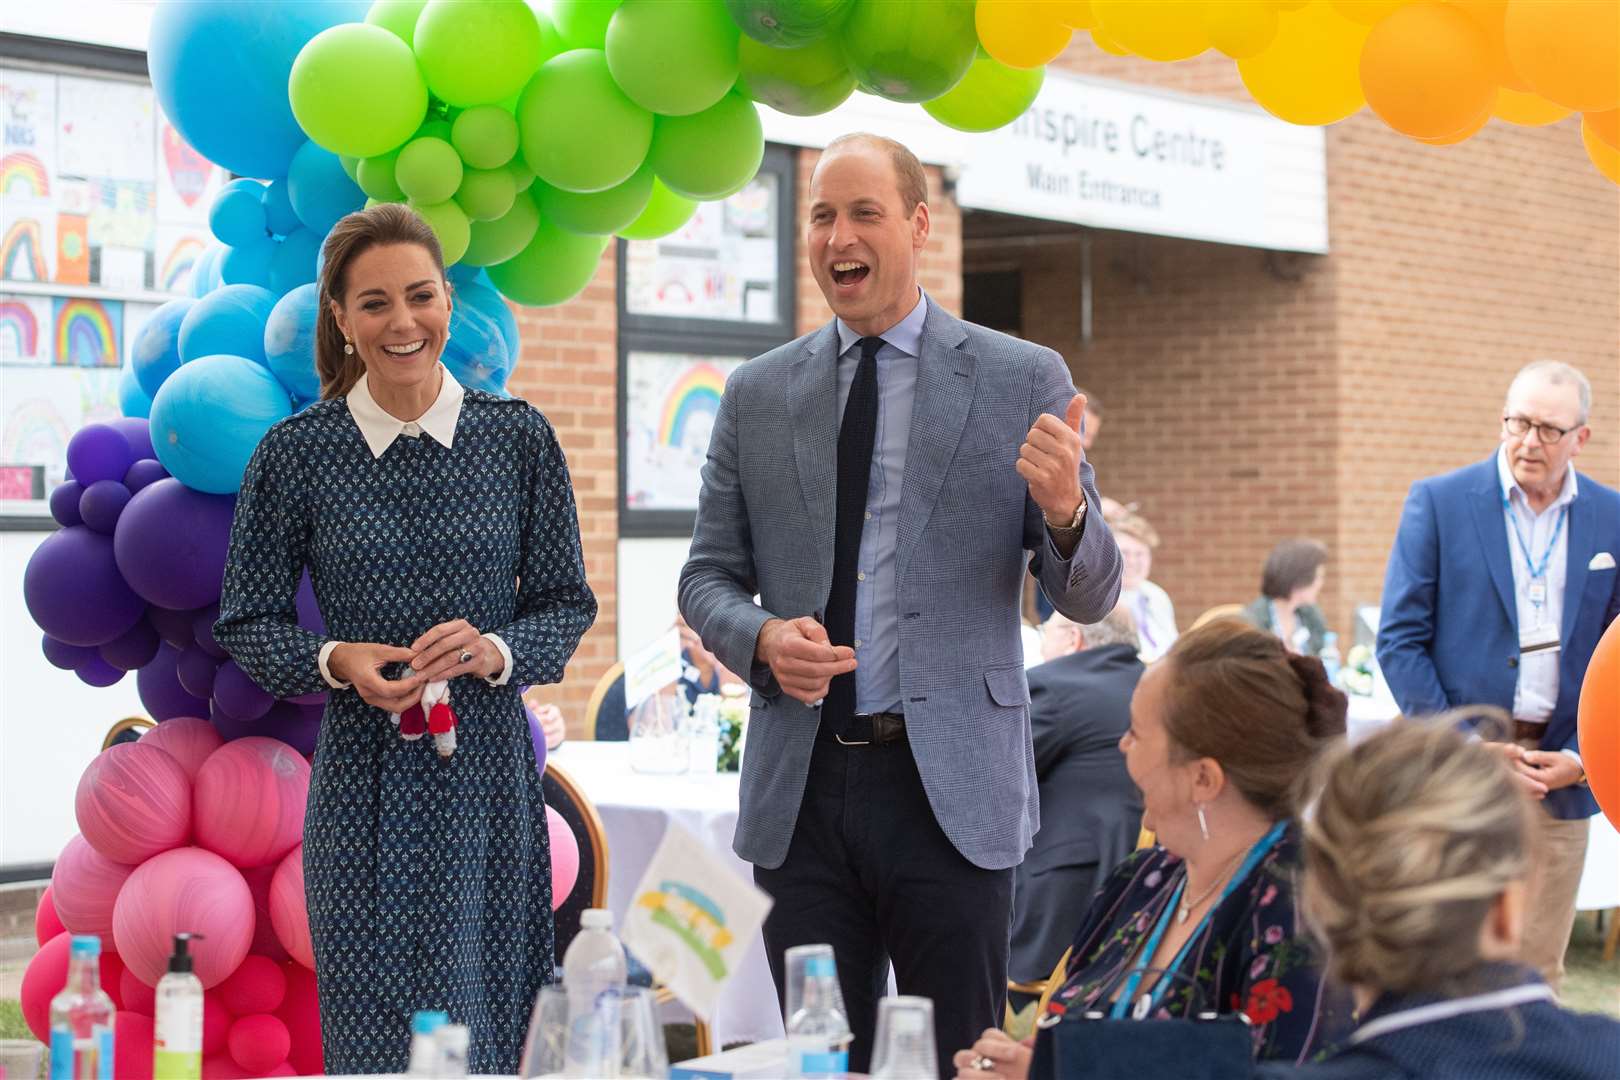 The Duke and Duchess of Cambridge visiting Queen Elizabeth Hospital in King’s Lynn as part of the NHS birthday celebrations (Joe Giddens/PA)